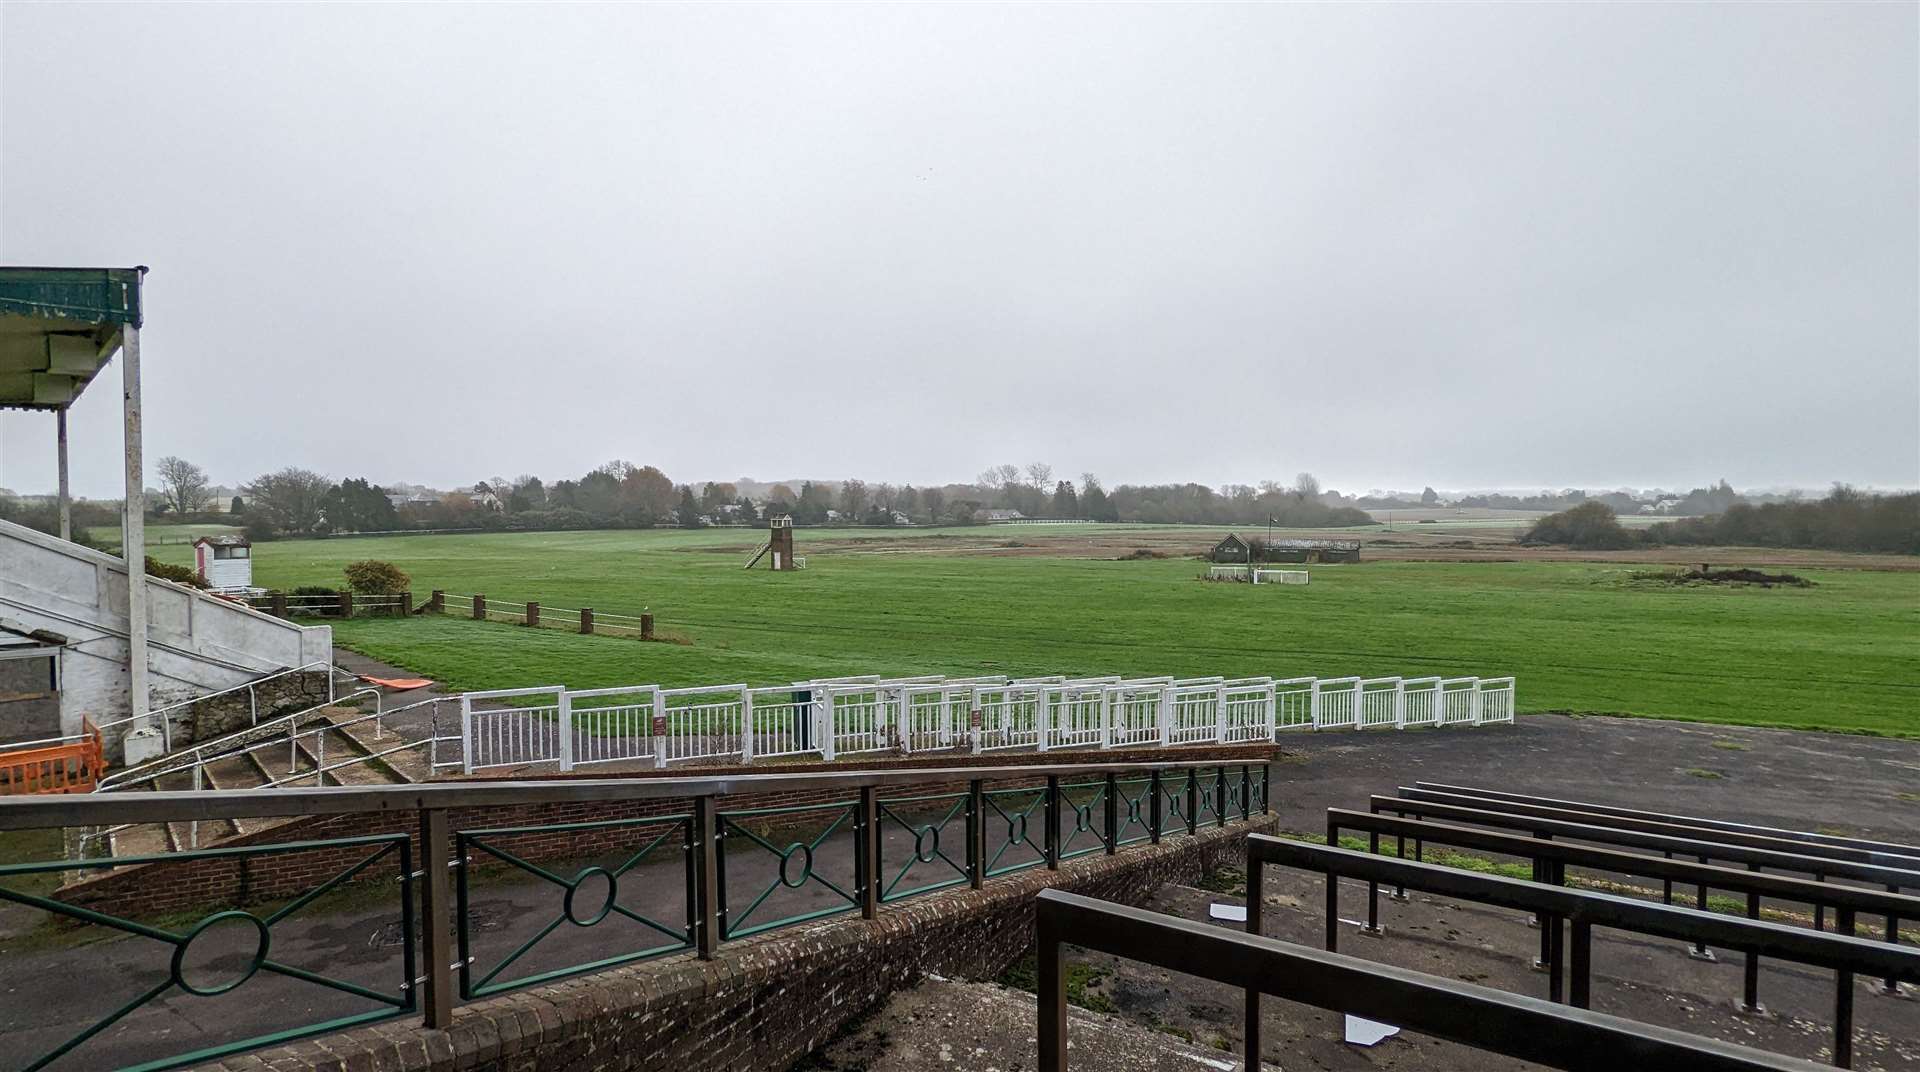 Looking down from the stands to the track at Folkestone racecourse today